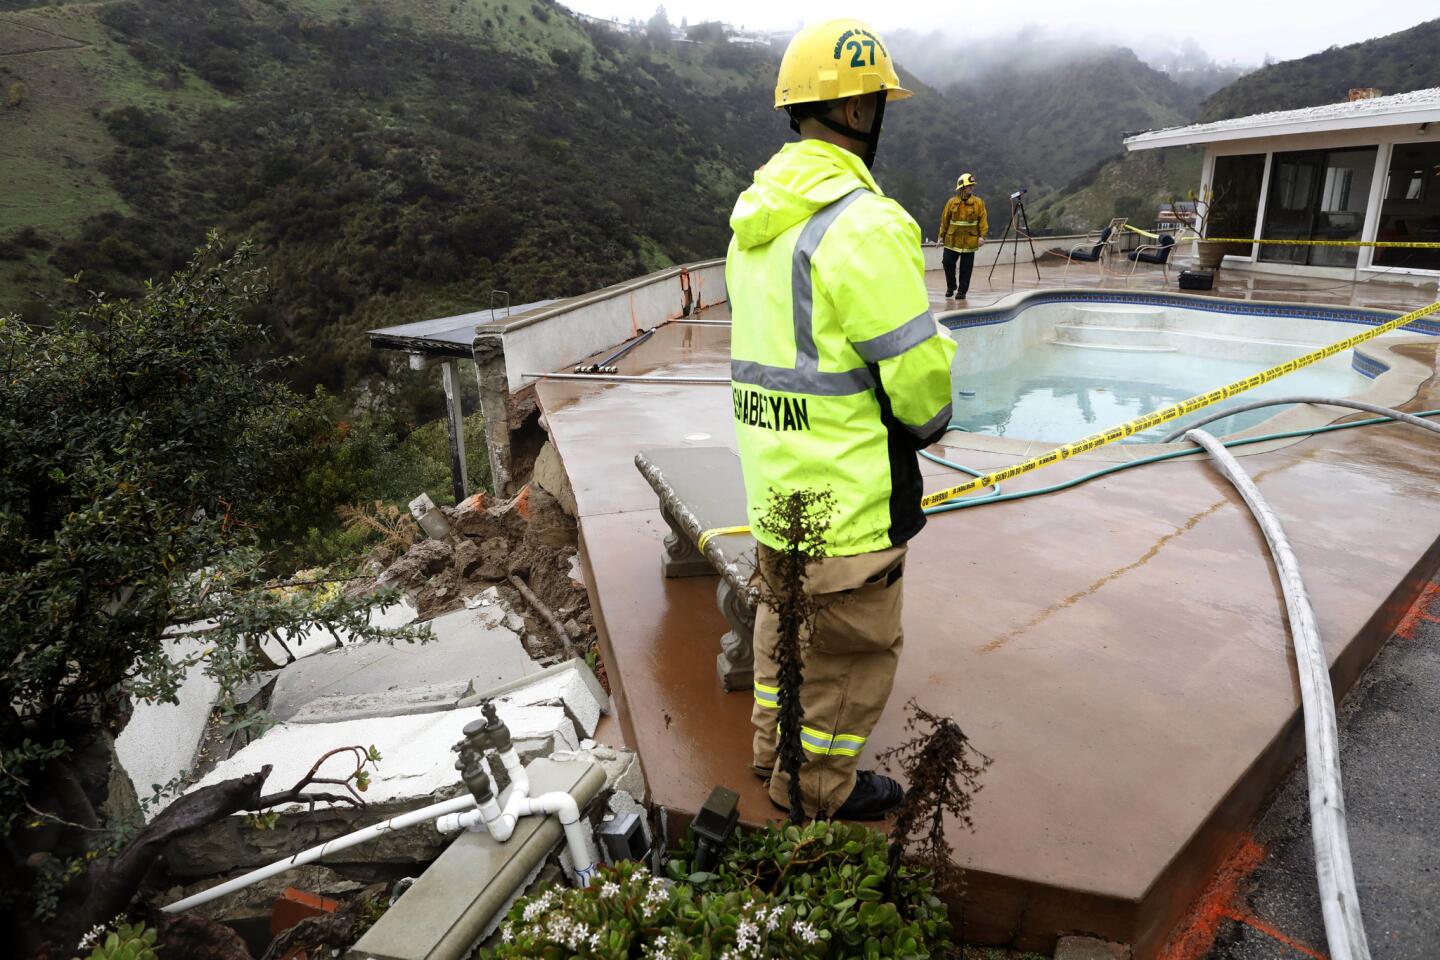 L.A. firefighters oversee drainage of a pool in the yard of a Hollywood Hills home. The pool was compromised as soil shifted during the recent rains.